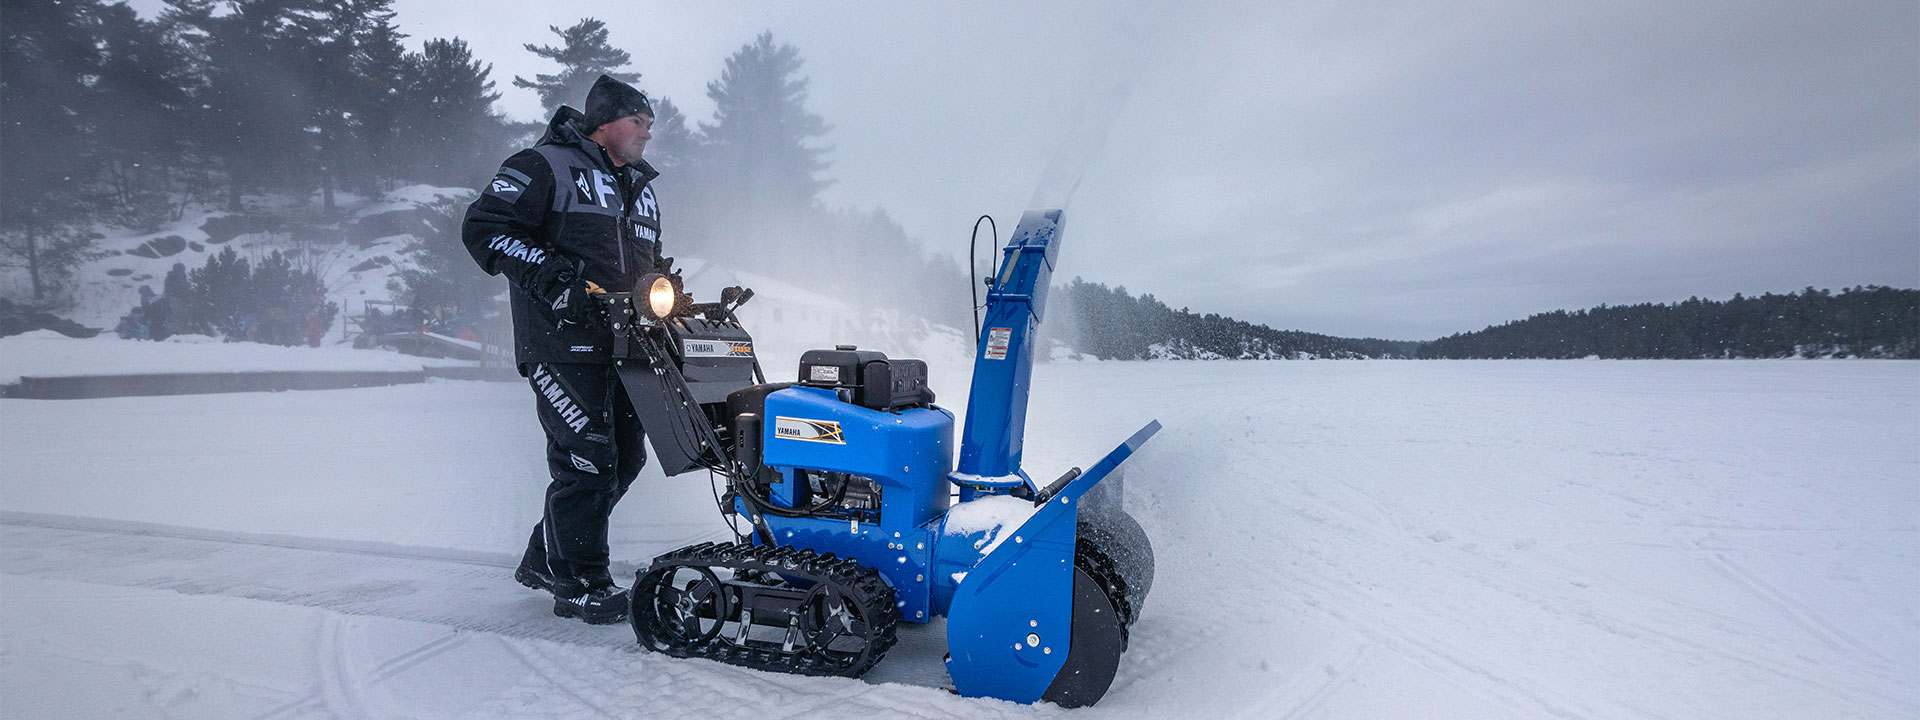 5 Things To Consider When Buying A Snowblower - Yamaha Motor Canada